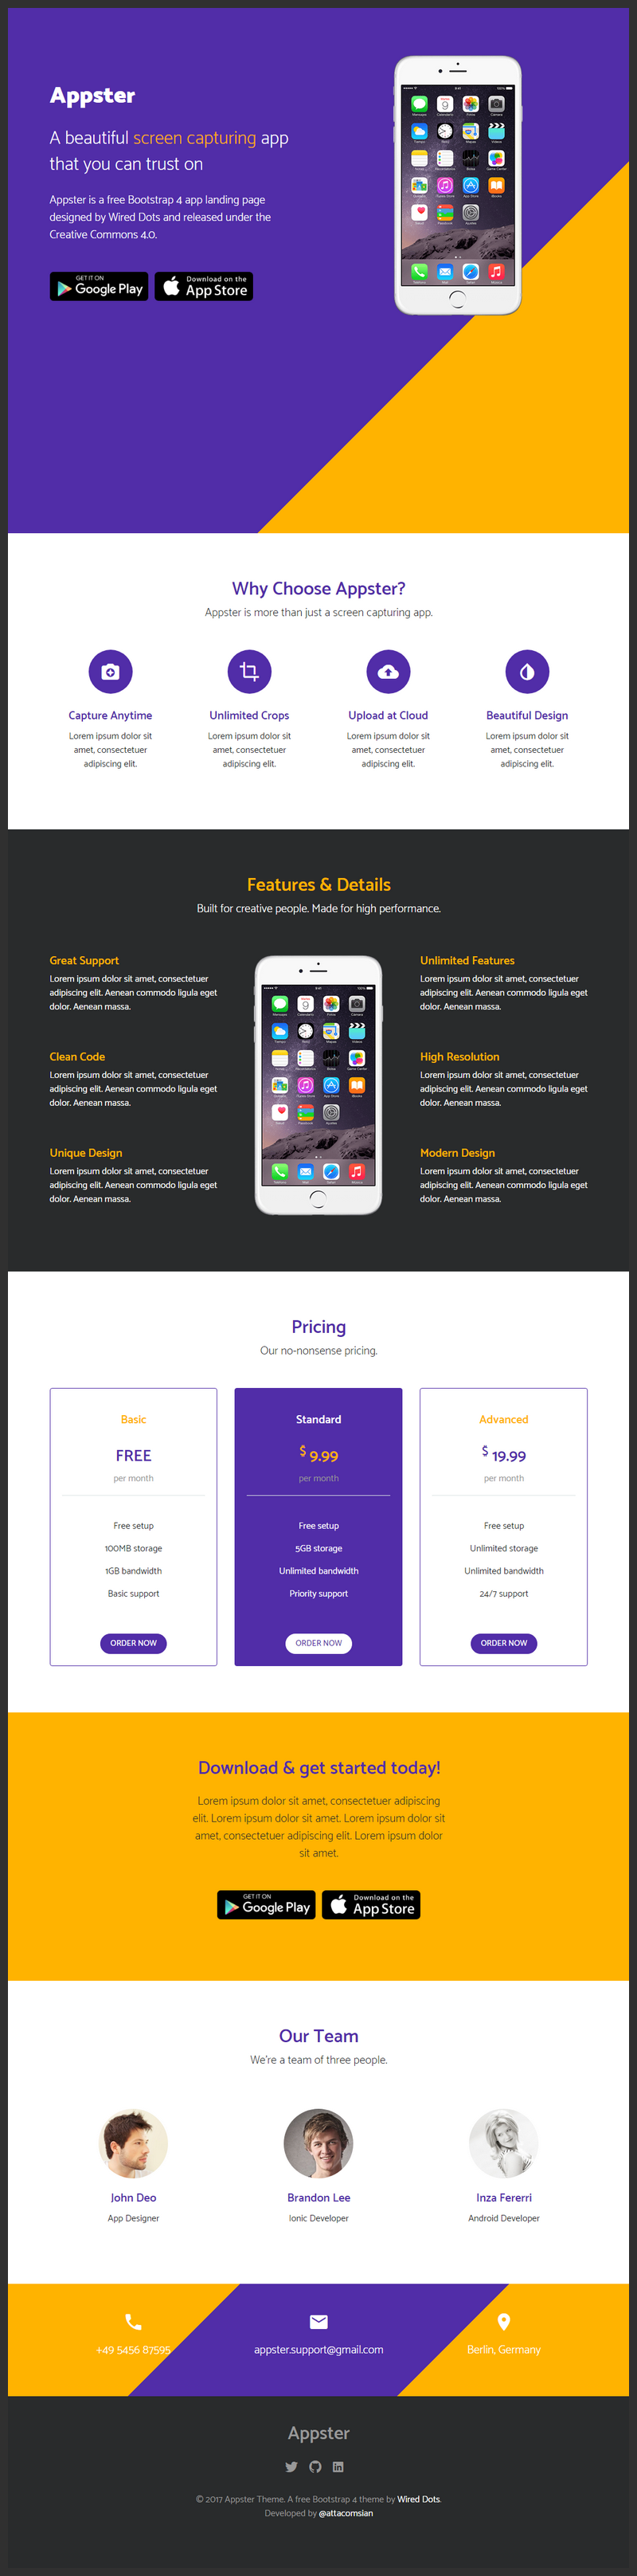  Bootstrap  4  Landing  Page  Template  Bypeople